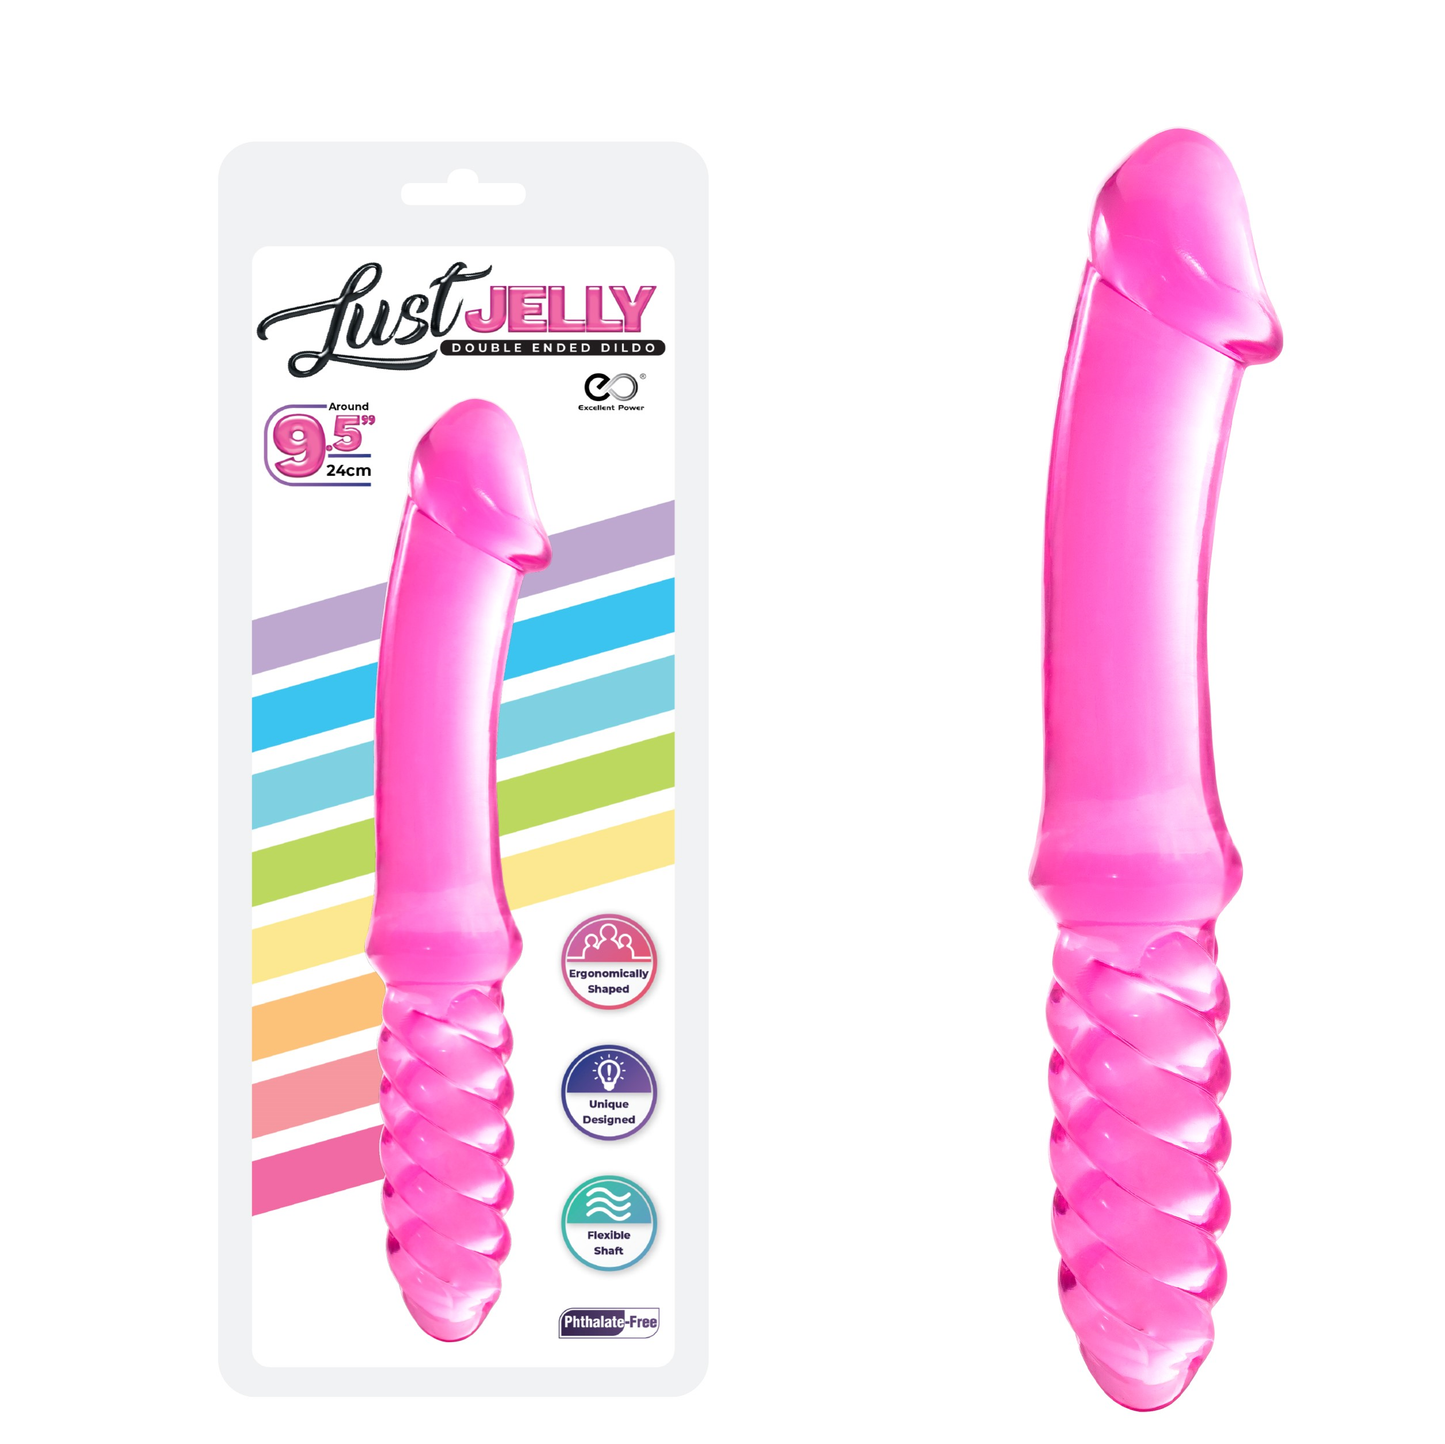 LUST JELLY 9.5 INCH DOUBLE DONG RIBBED